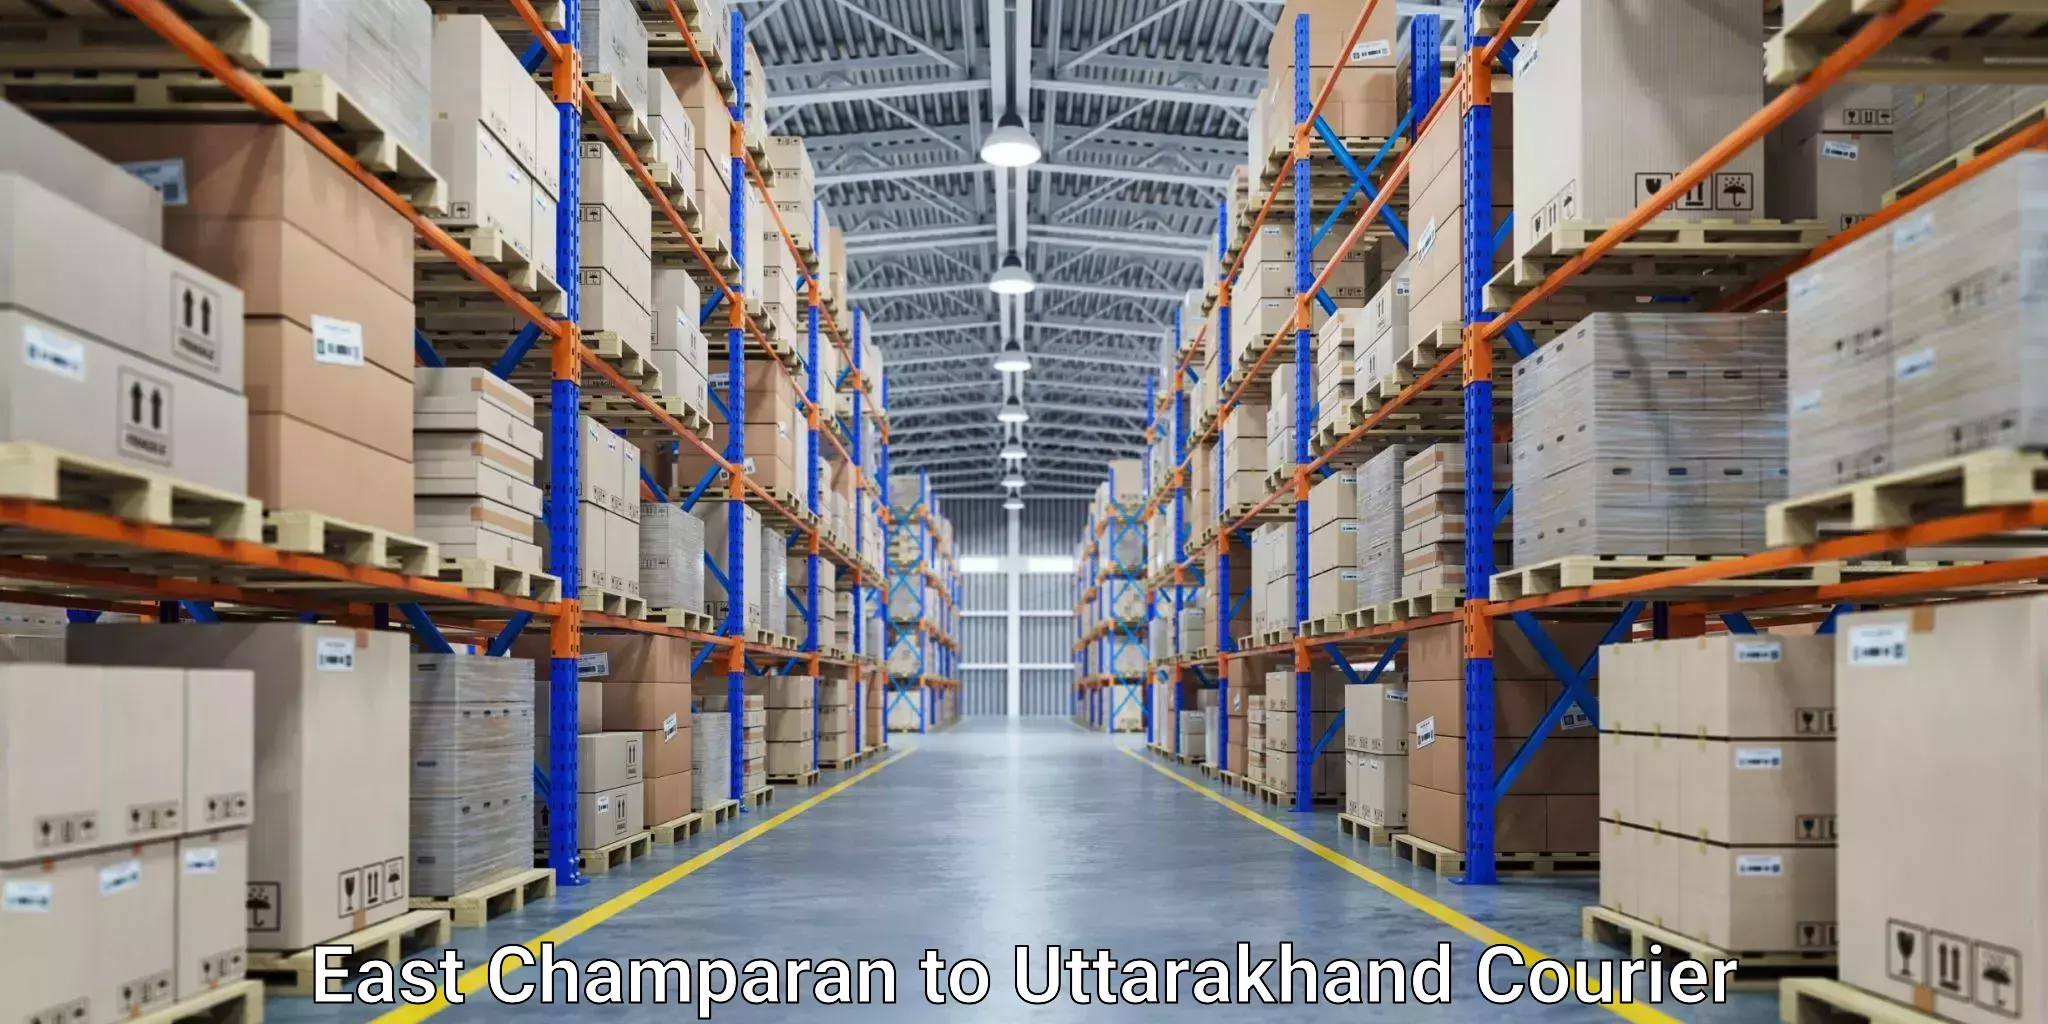 Bulk courier orders East Champaran to Lansdowne